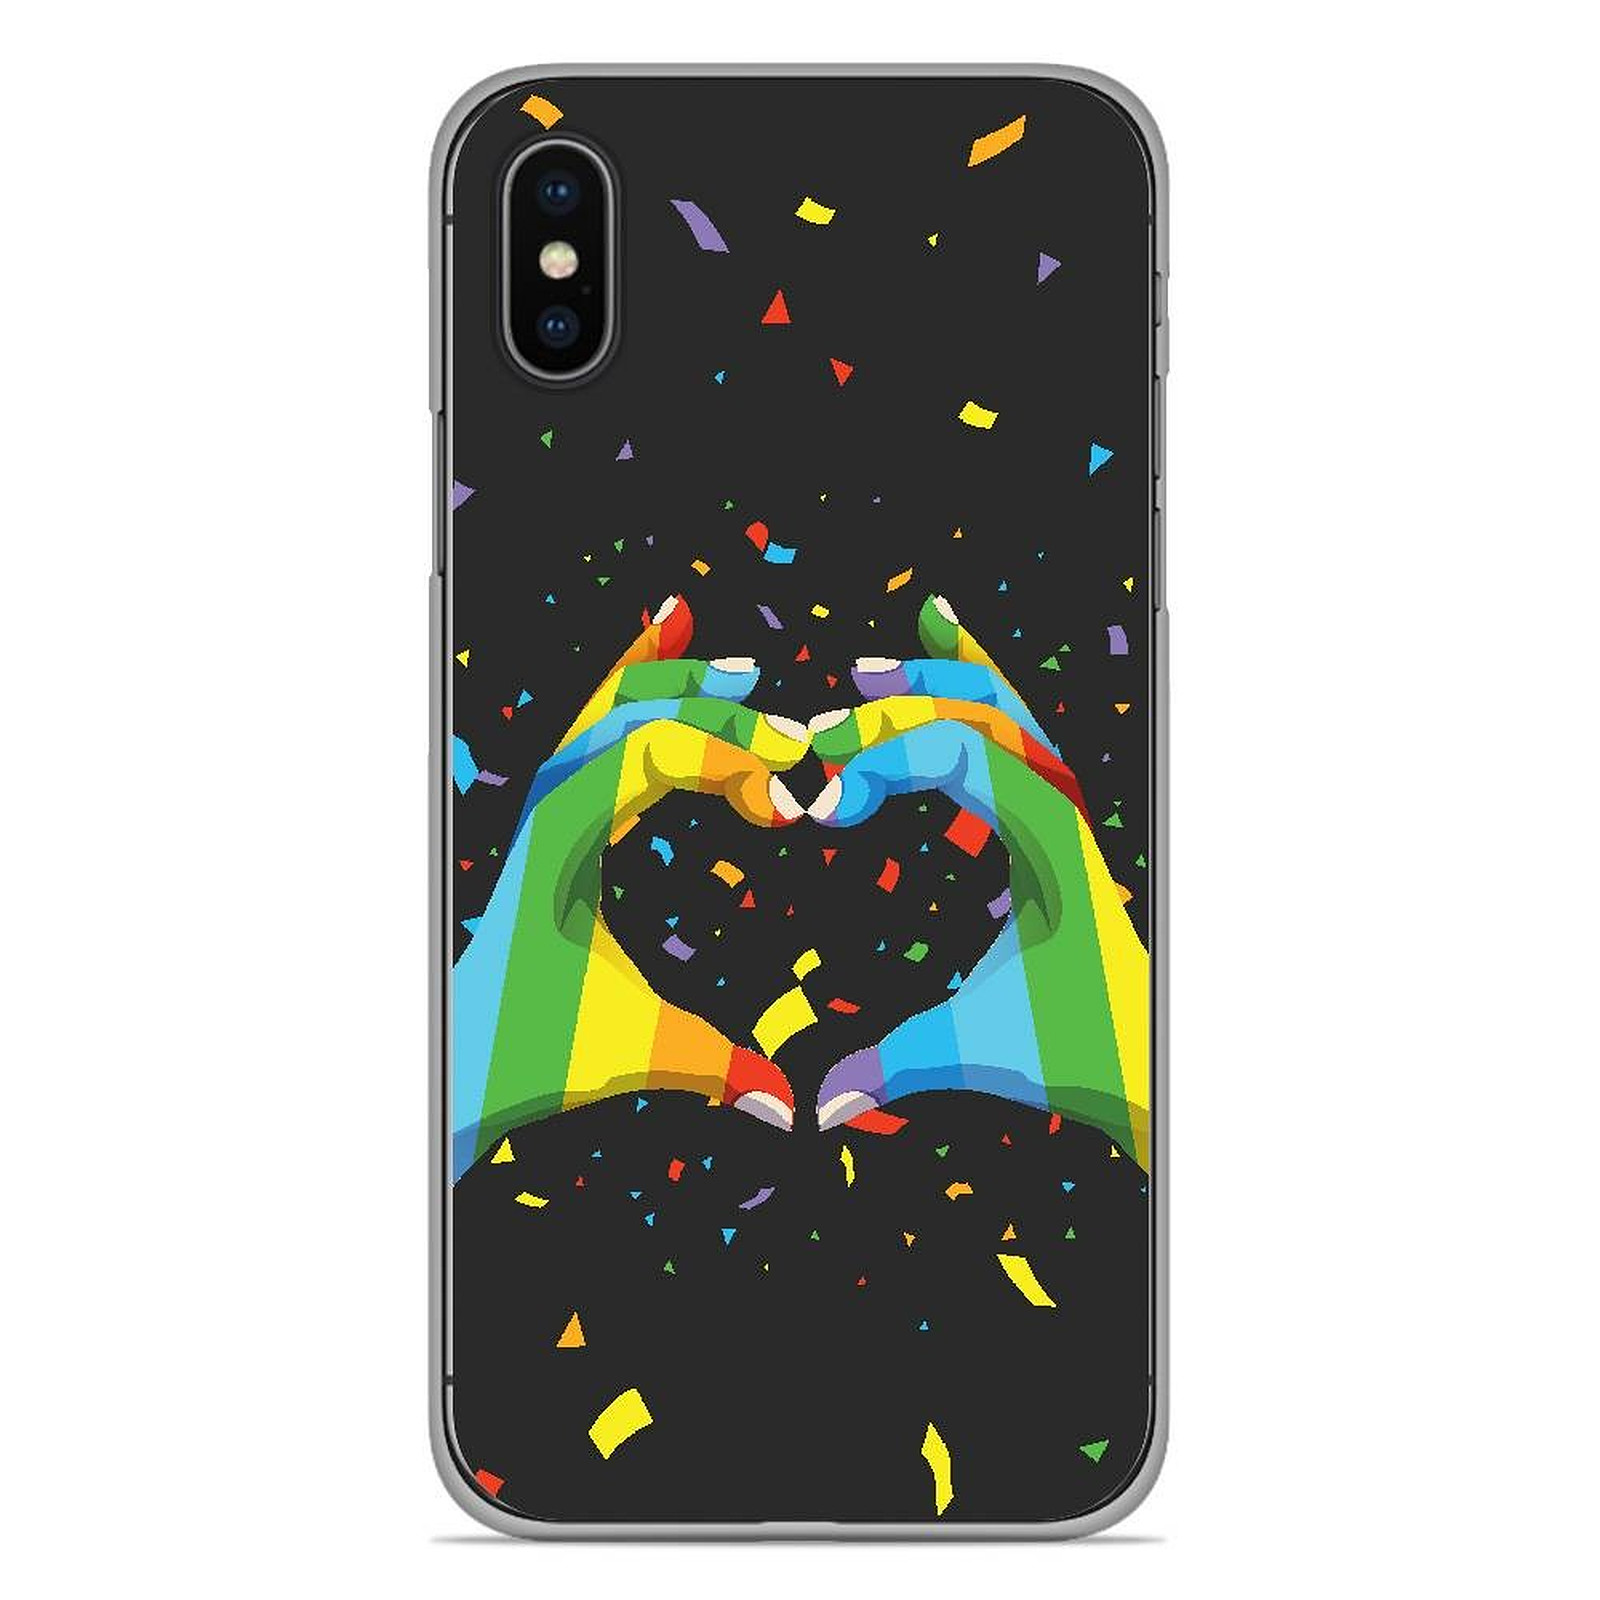 1001 Coques Coque silicone gel Apple iPhone XS Max motif LGBT - Coque telephone 1001Coques